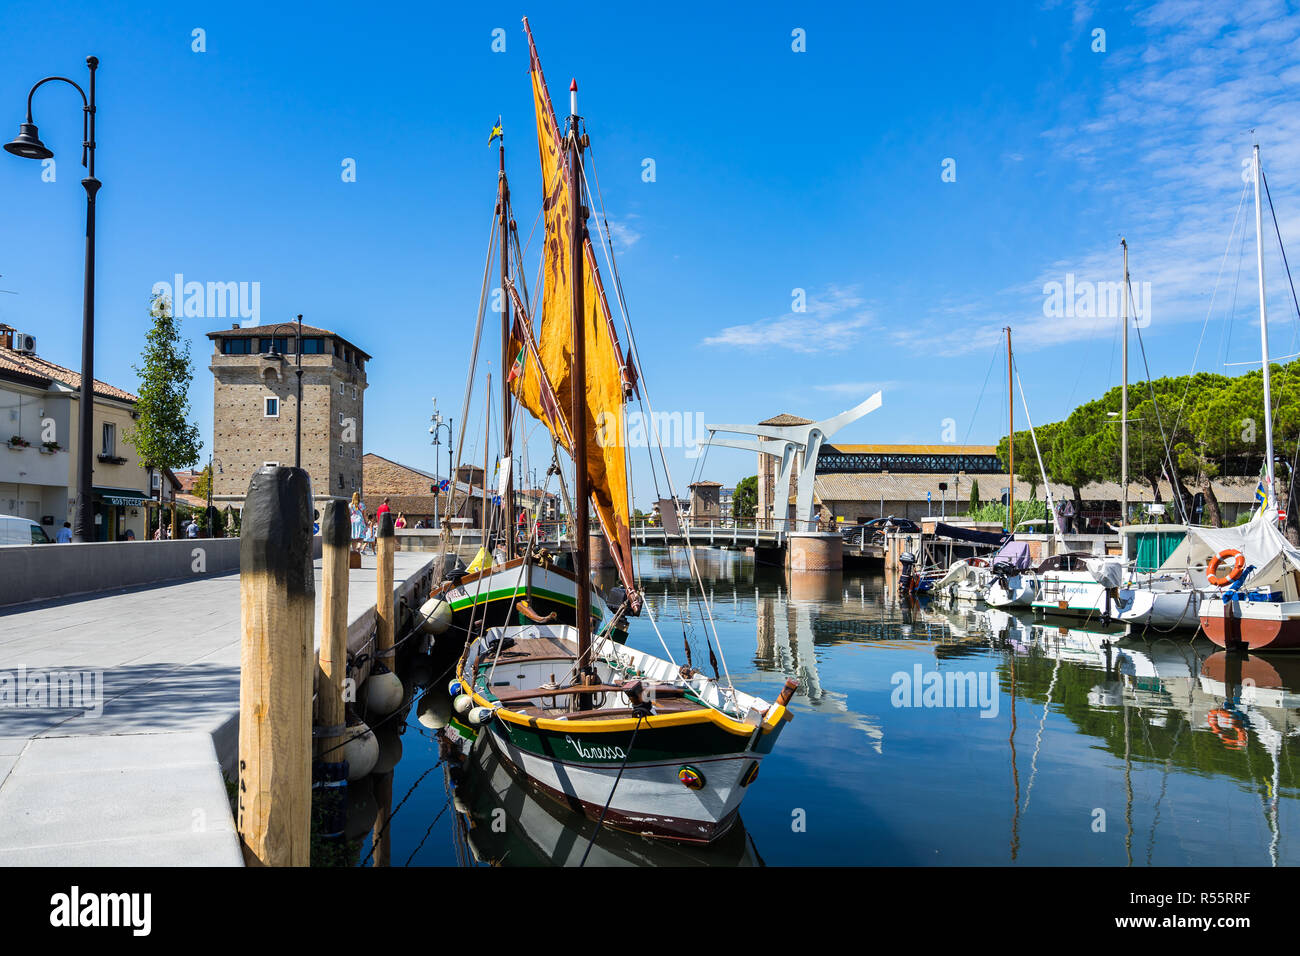 Boats moored at the colorful canal of Cervia. Cervia, Emilia Romagna, Italy, August 2017 Stock Photo